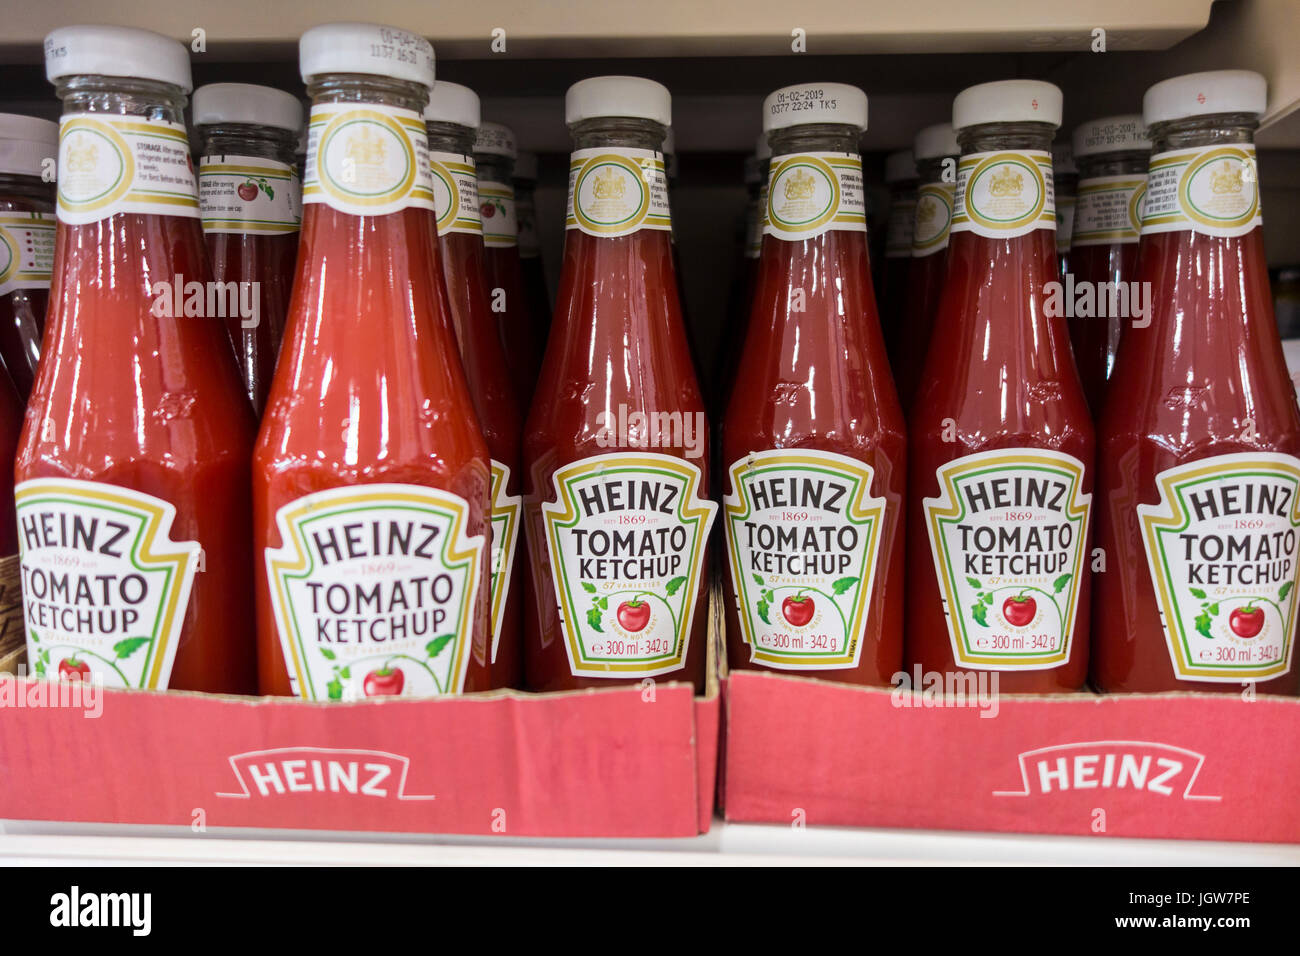 Heinz tomato ketchup for sale on a supermarket shelf in the UK Stock Photo